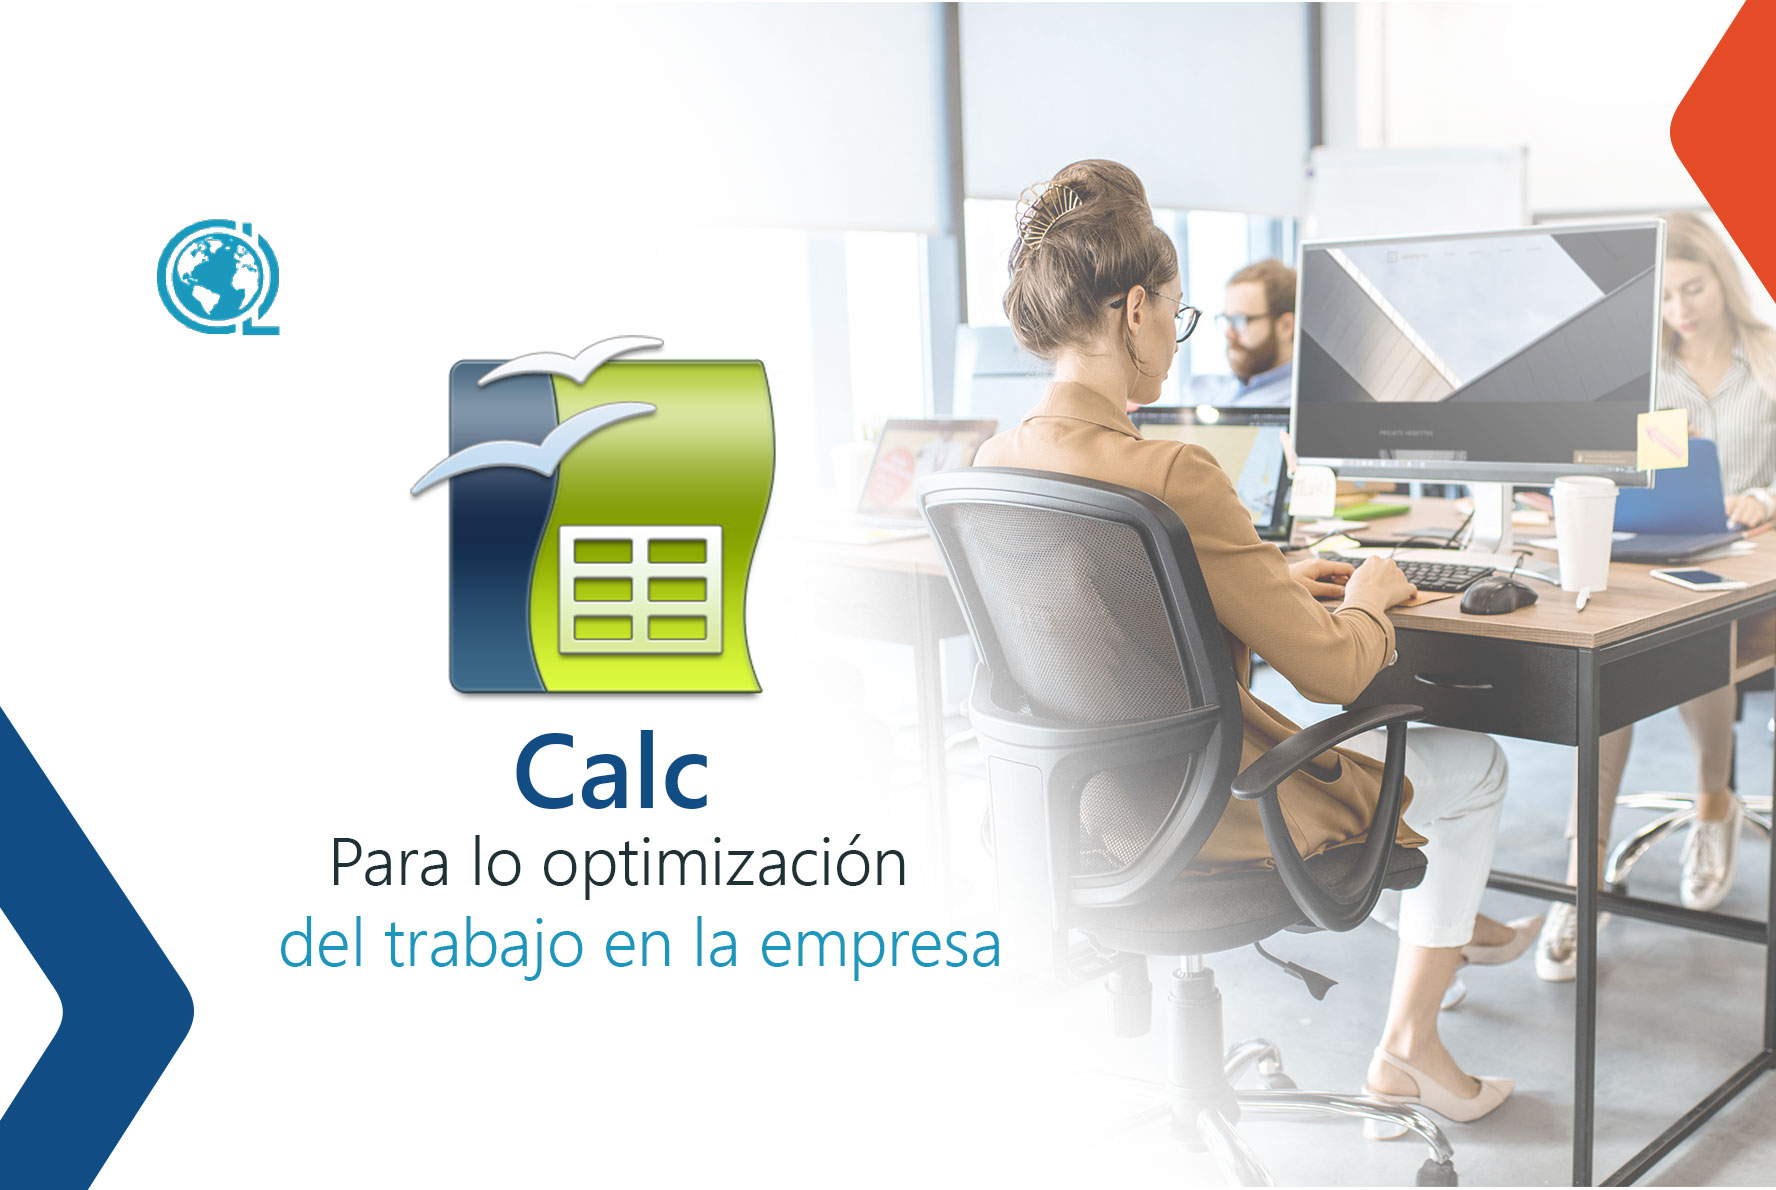  Calc for the optimization of work in the company (Open Office)